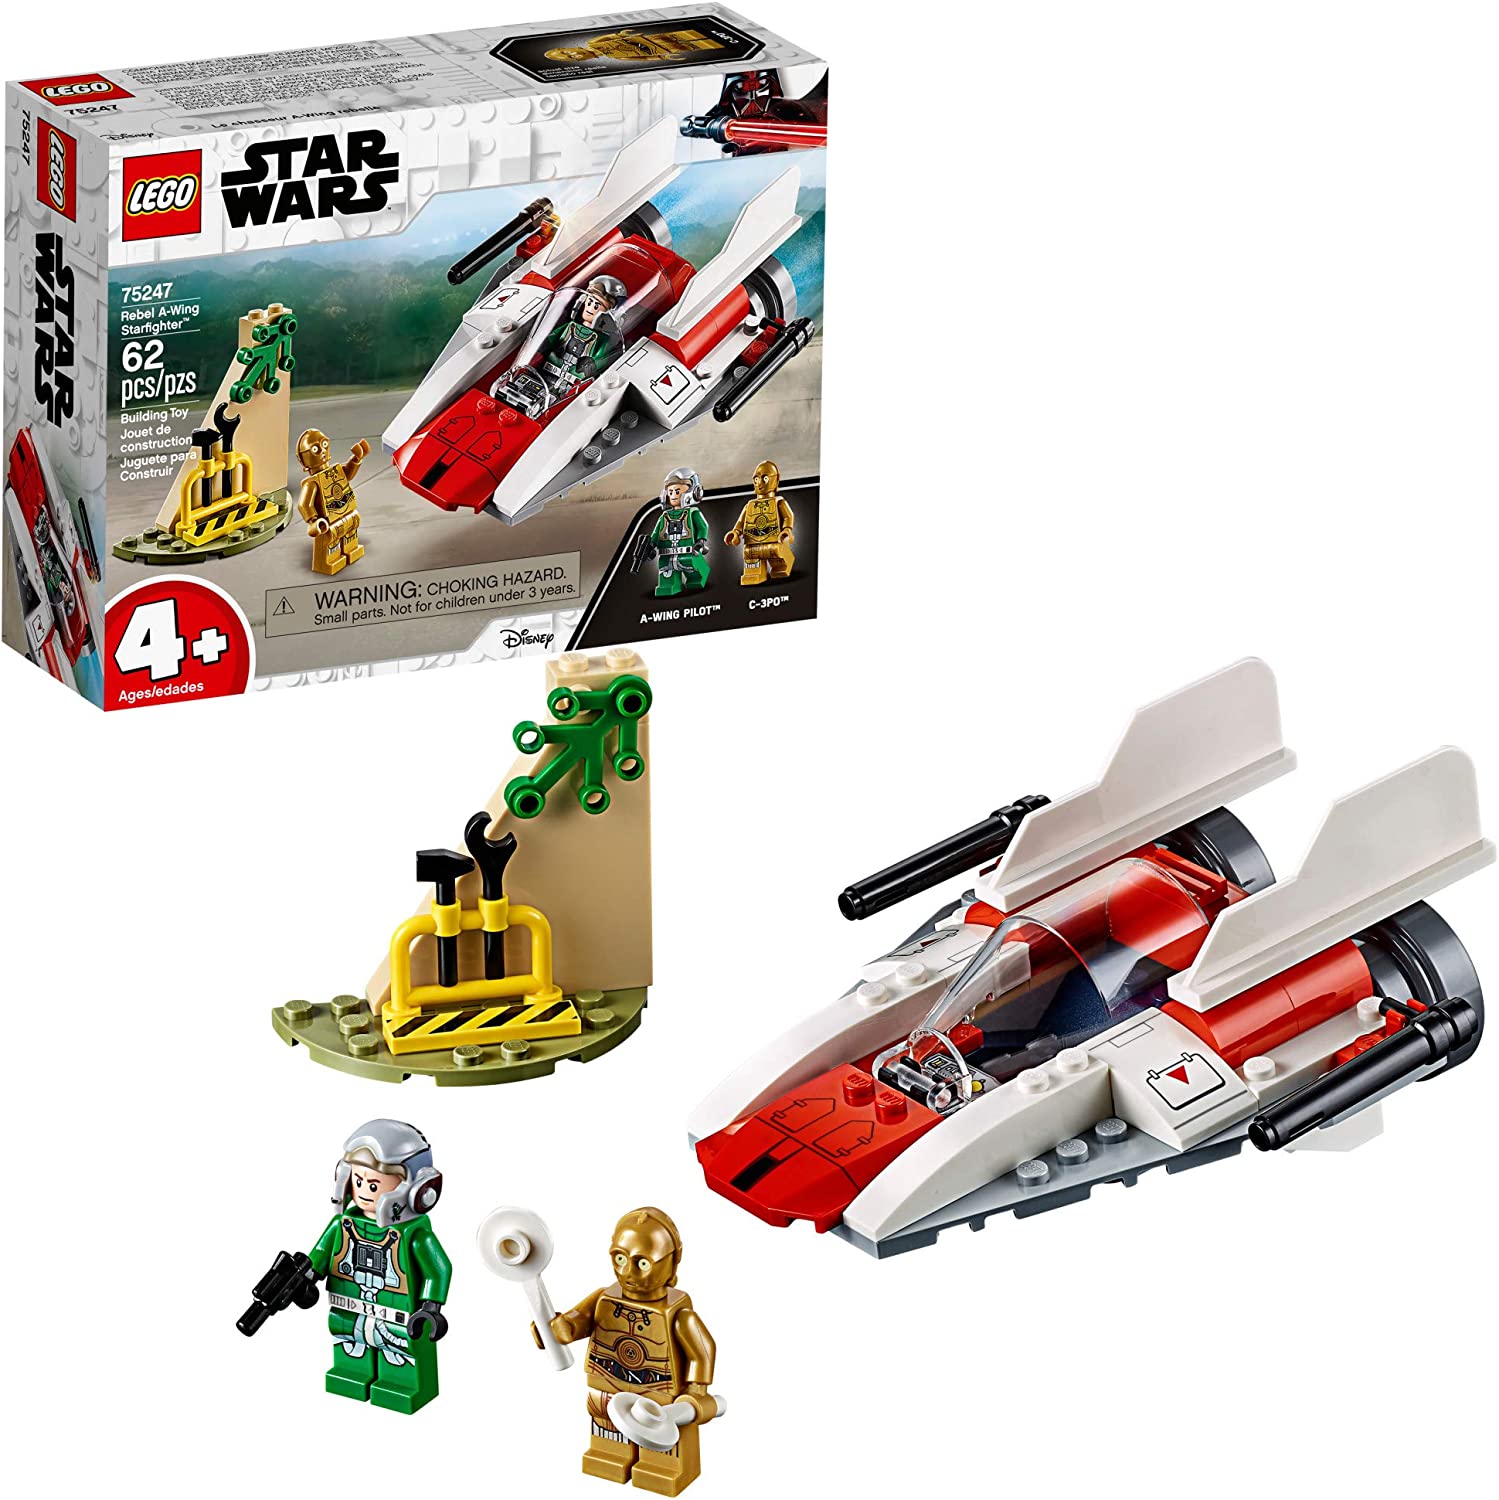 Lego Wars Rebel A Wing Starfighter Building Kit 75247 (62 Pieces) Hollywood Heroes